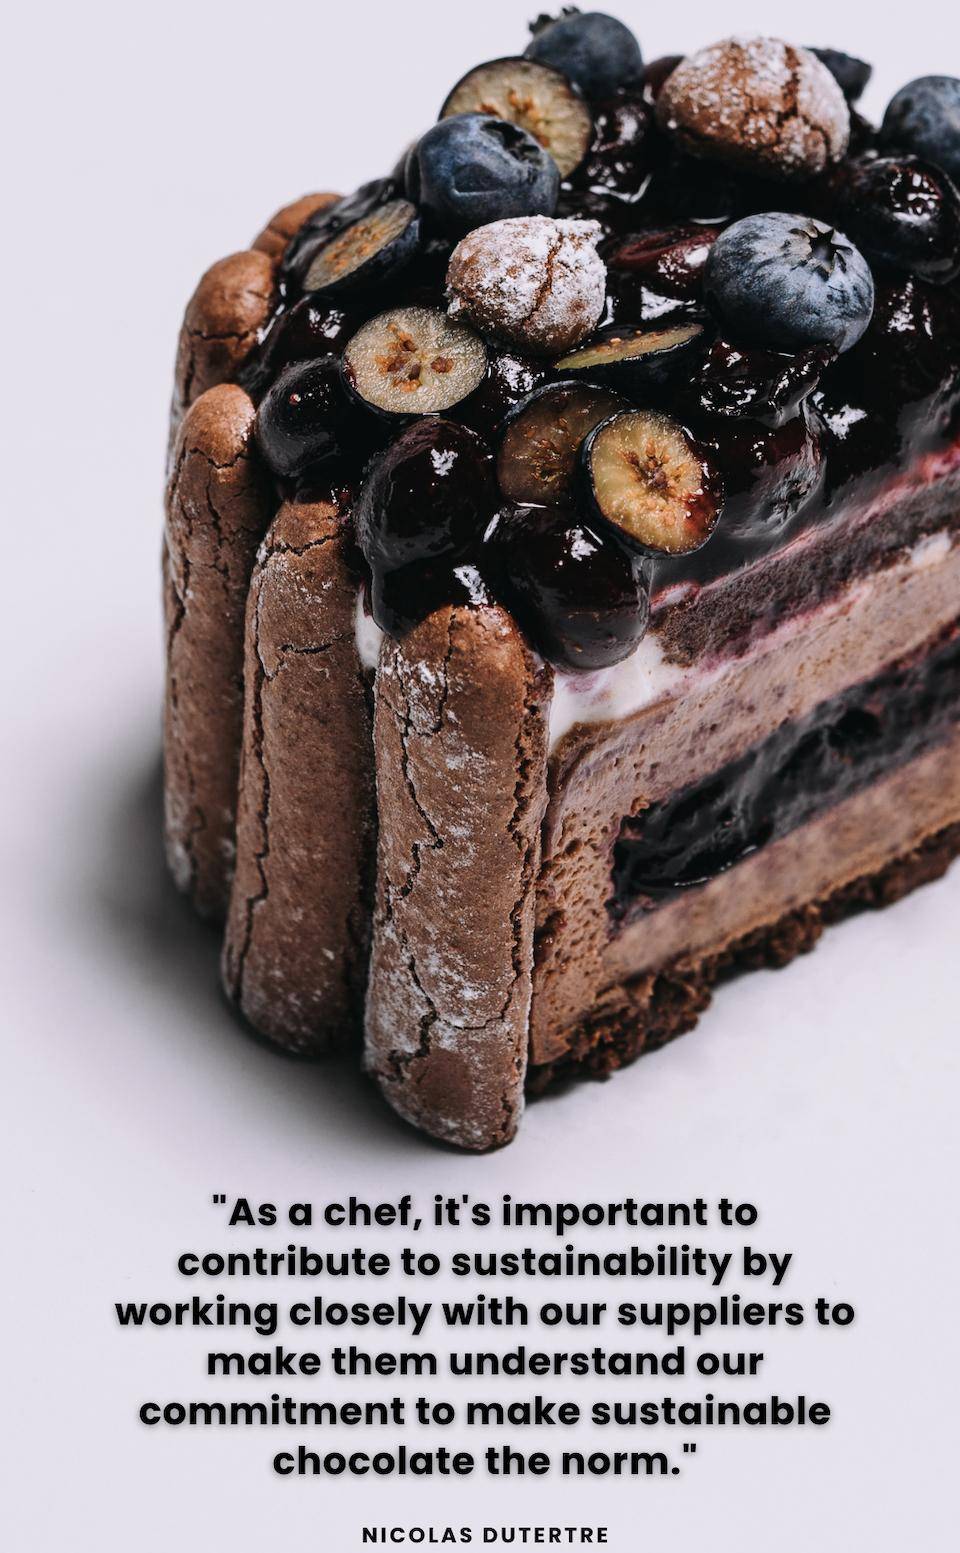 Image of Chef Nico's chocolate charlotte. Text: "As a chef, it's important to contribute to sustainability by working closely with our suppliers to make them understand our commitment to making sustainable chocolate the norm." 